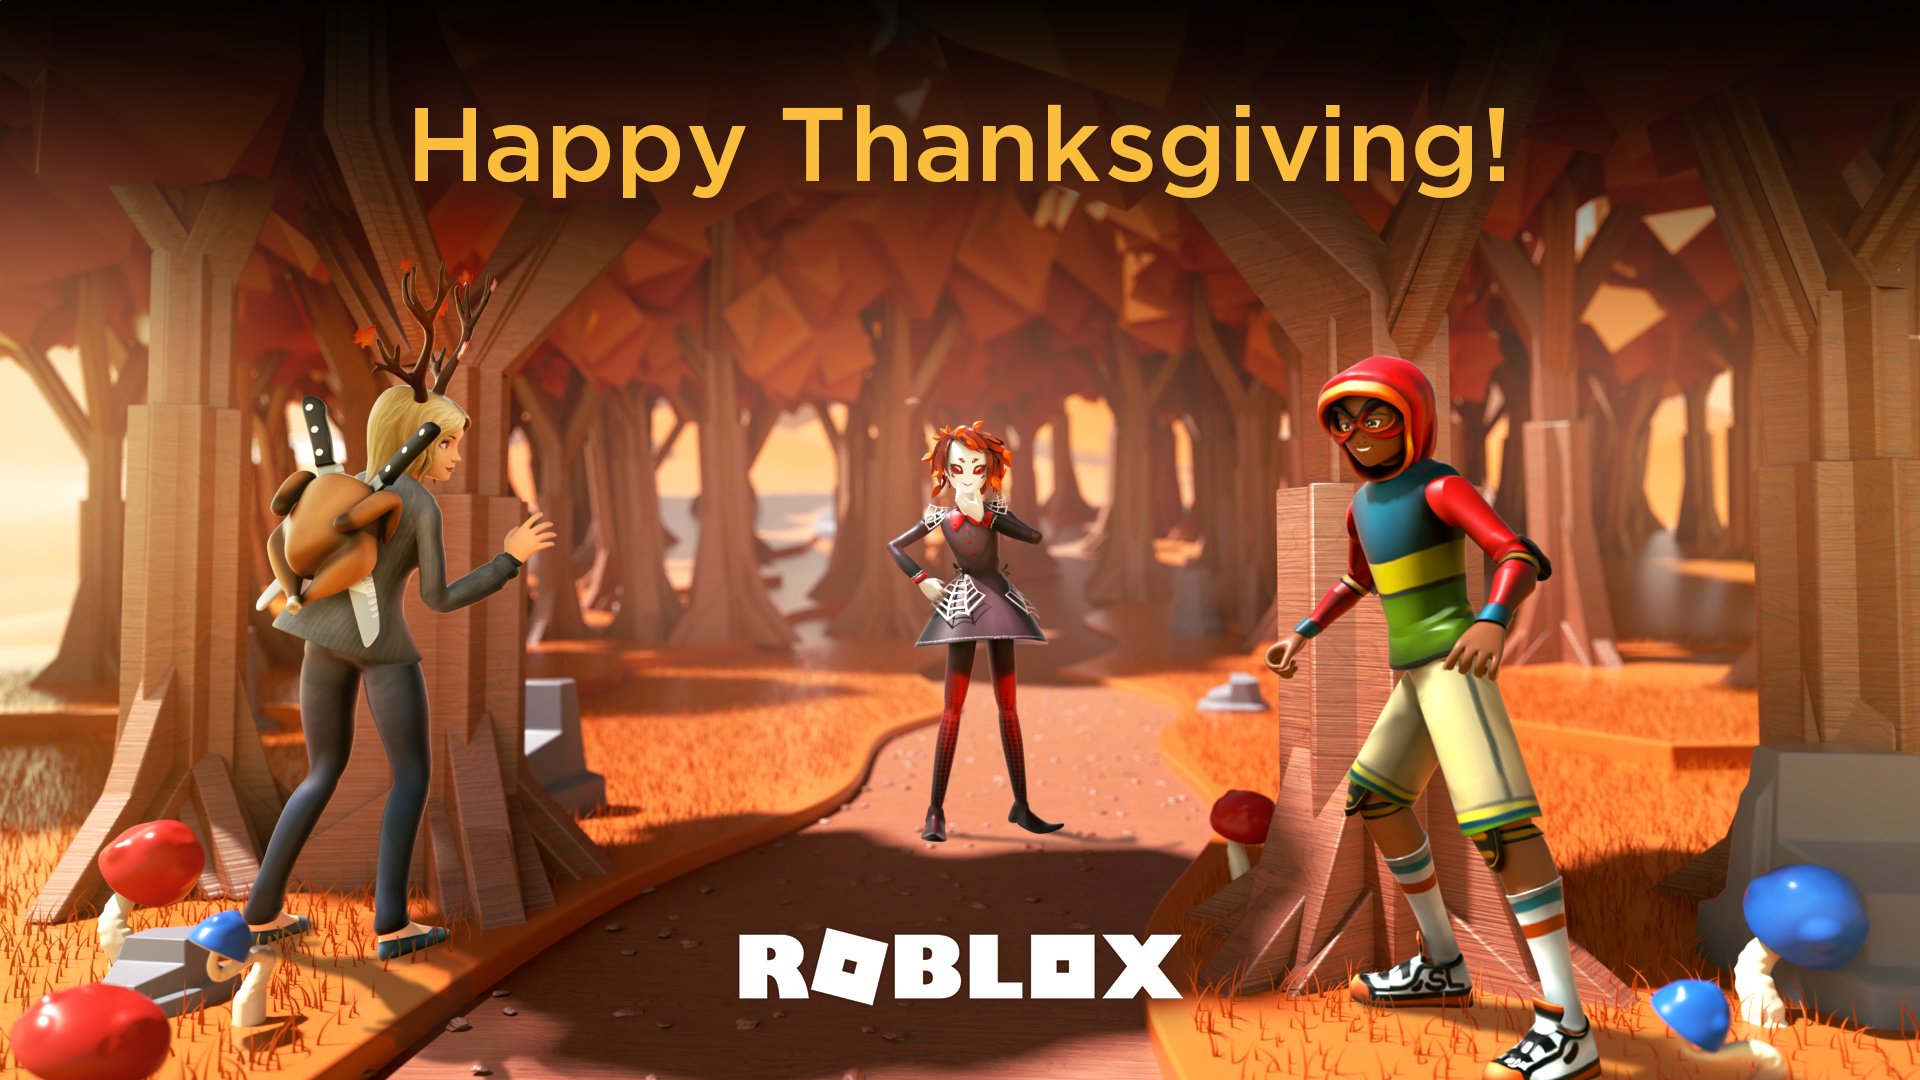 Roblox בטוויטר Wherever You Are Here S To A Day Filled With Food Friends And Family Happy Thanksgiving Roblox Happythanksgiving Thanksgiving2019 Thanksgiving19 Https T Co Idnx1ppkhj - roblox on twitter wherever you are heres to a day filled